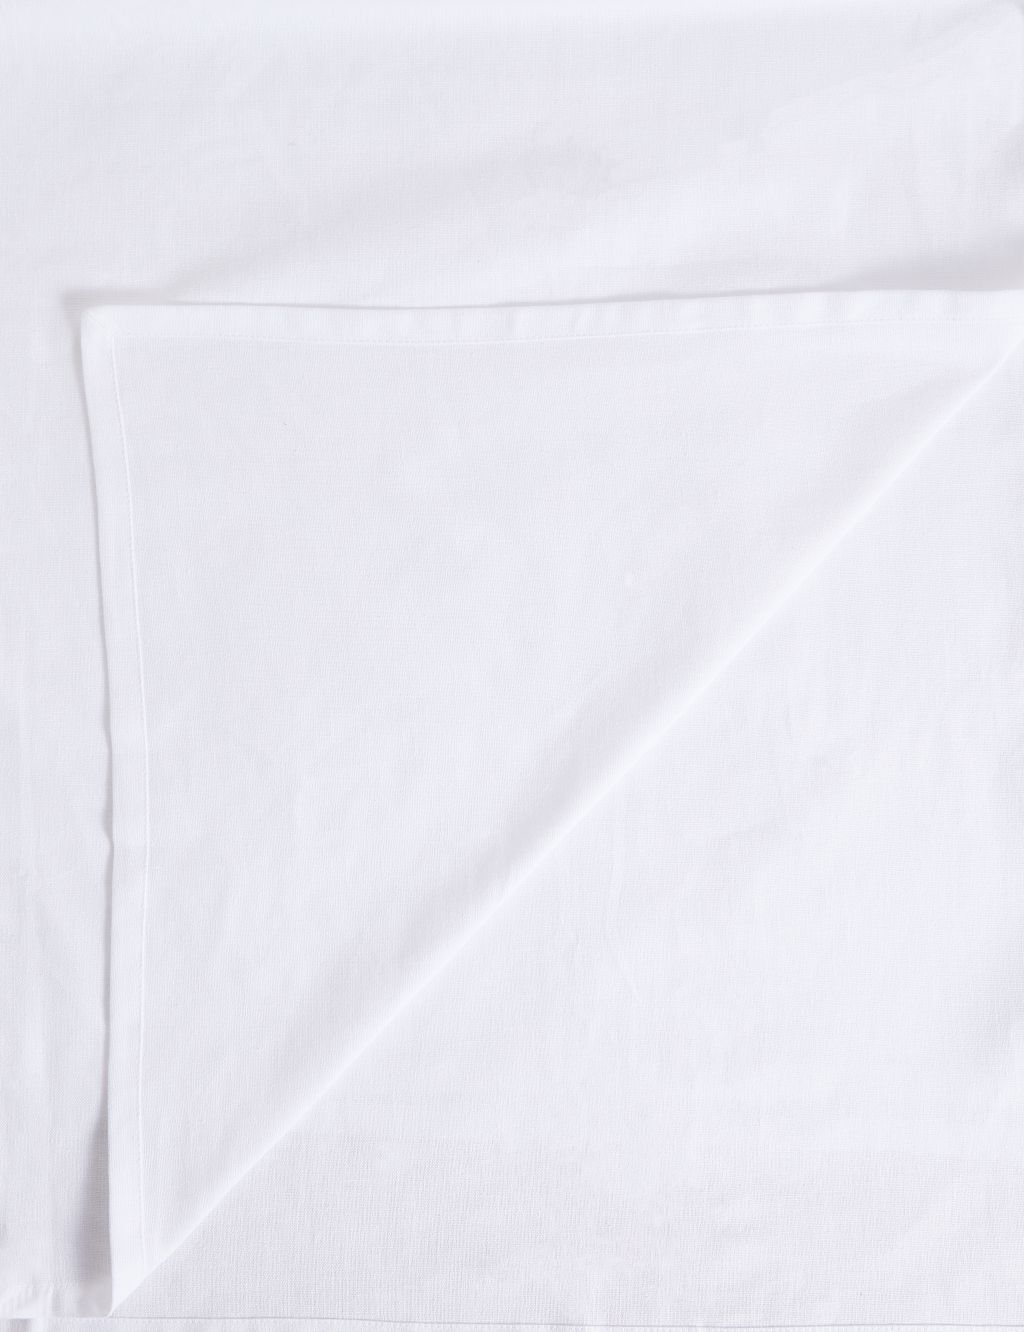 Cotton with Linen Tablecloth image 2